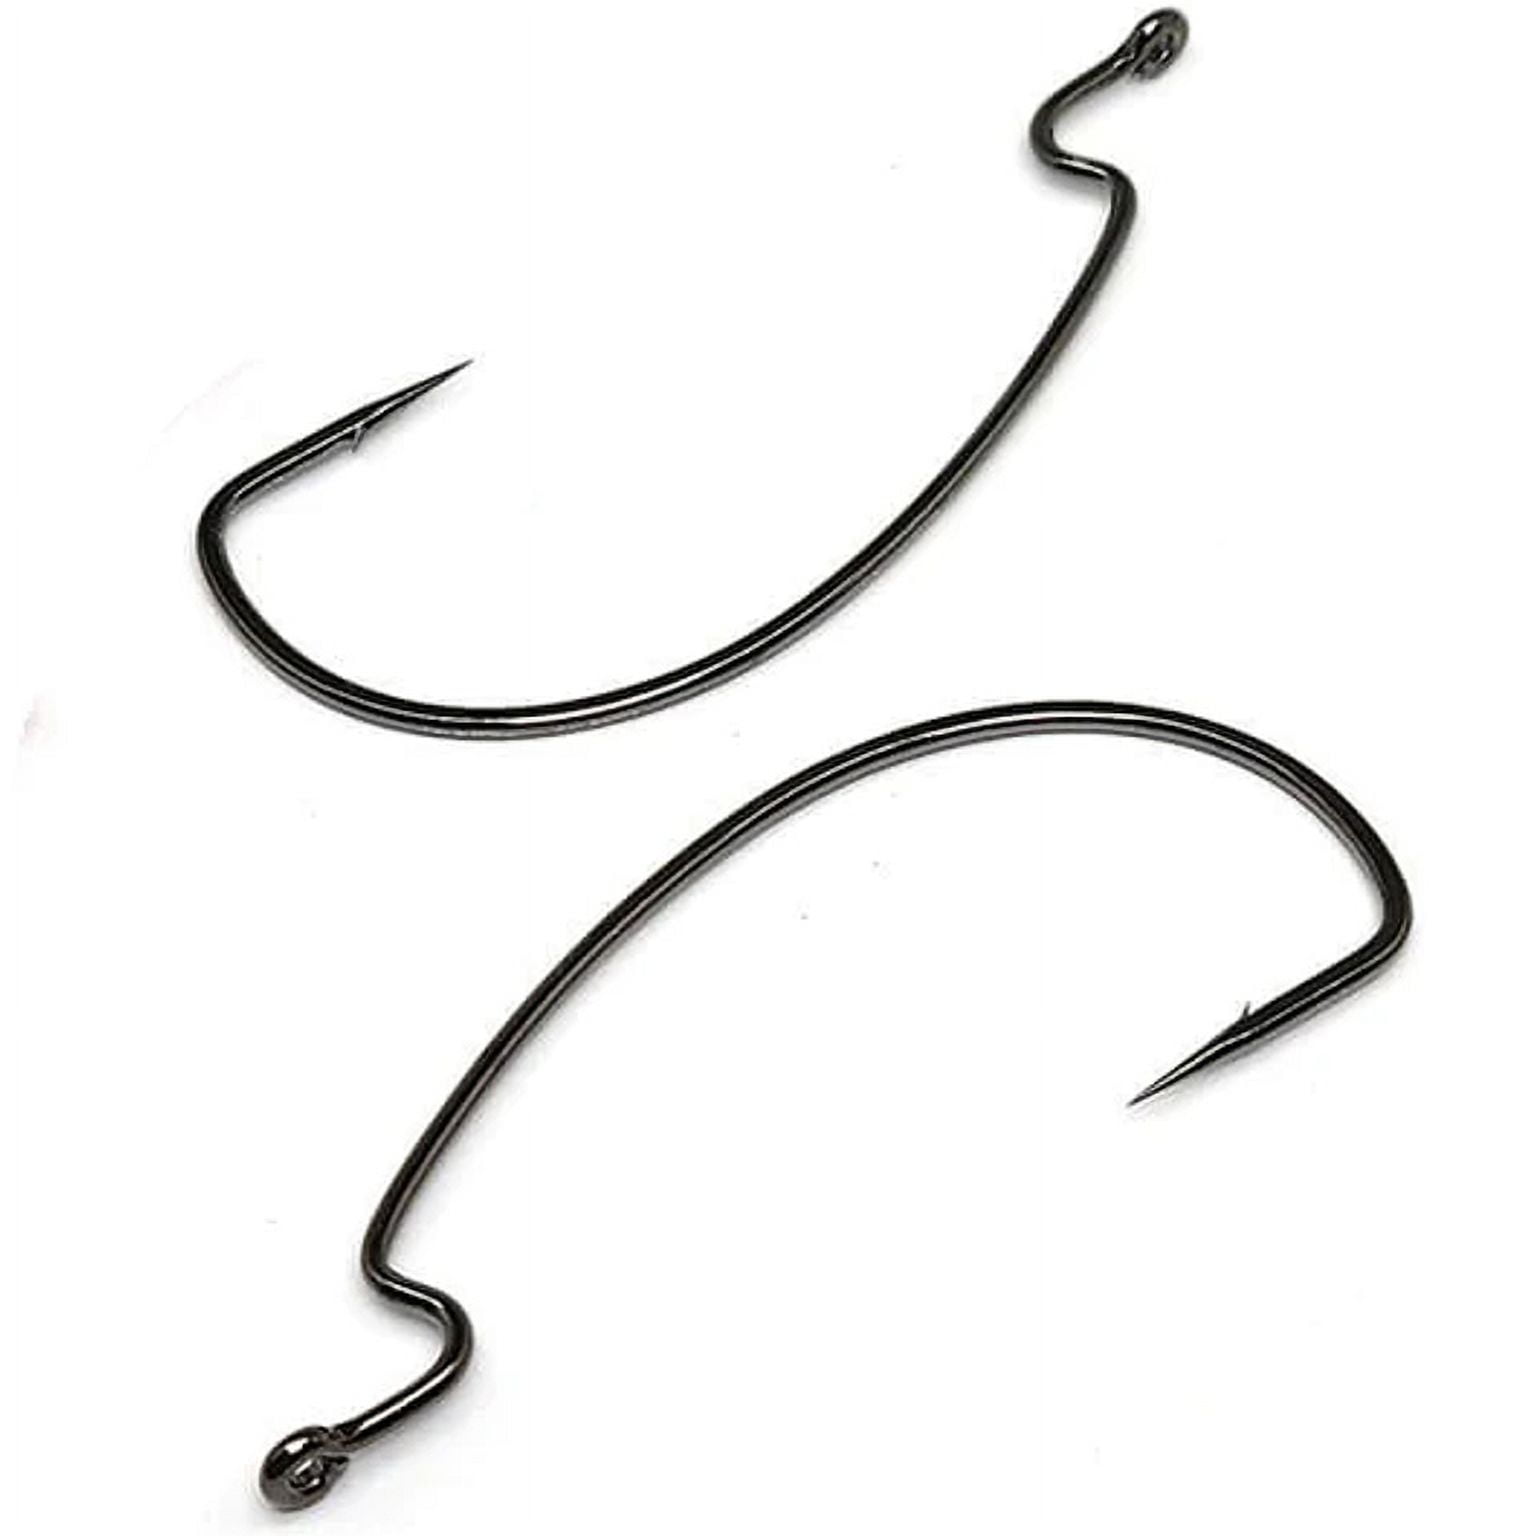 Gamakatsu Worm Offset EWG Hook in High Quality Carbon Steel, Size 4/0, NS  Black, 5-Pack 